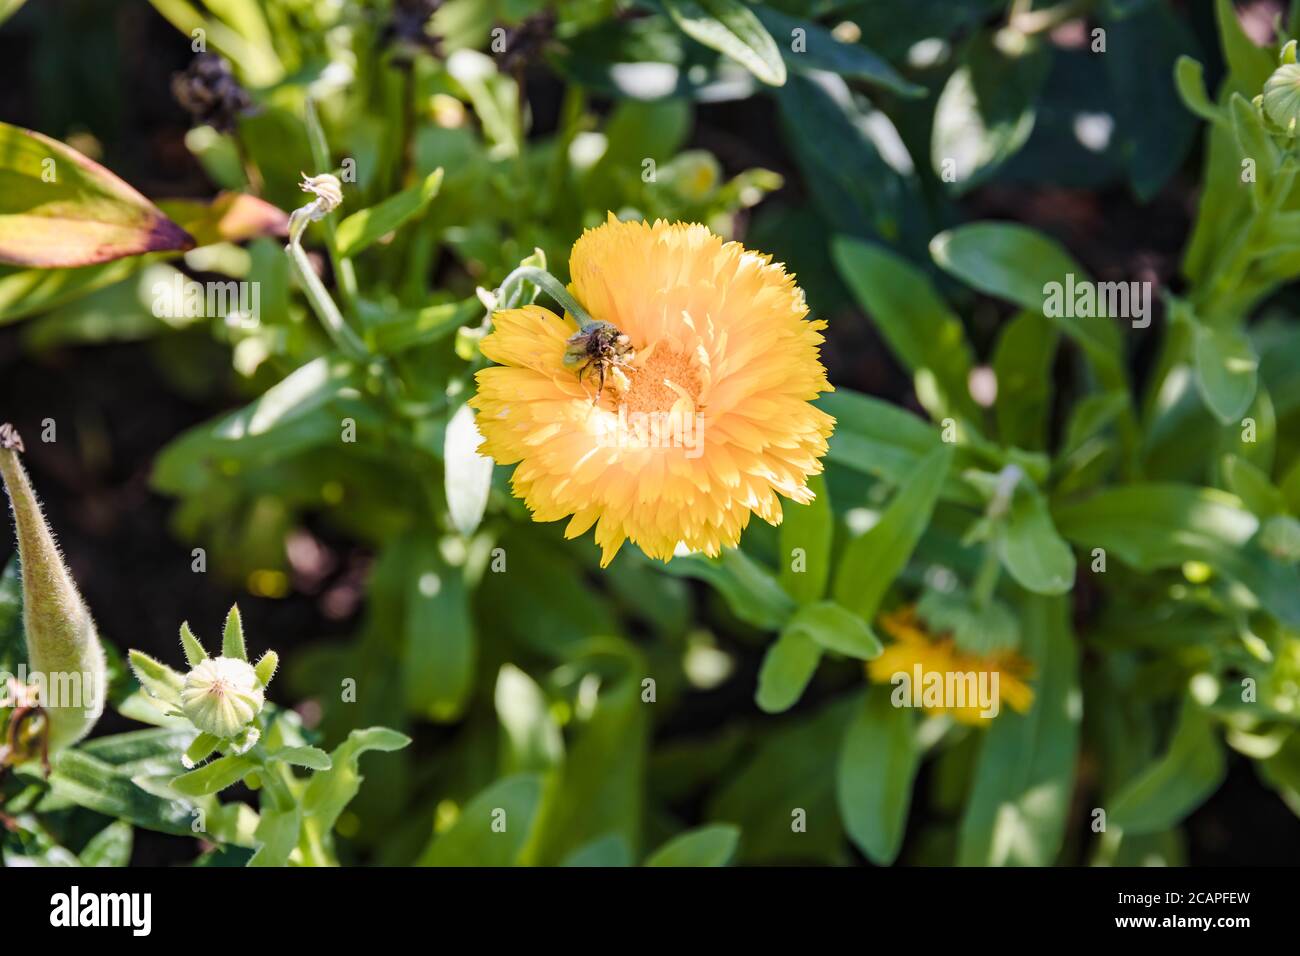 first of the yellow chrysanthemums blooming in the garden Stock Photo